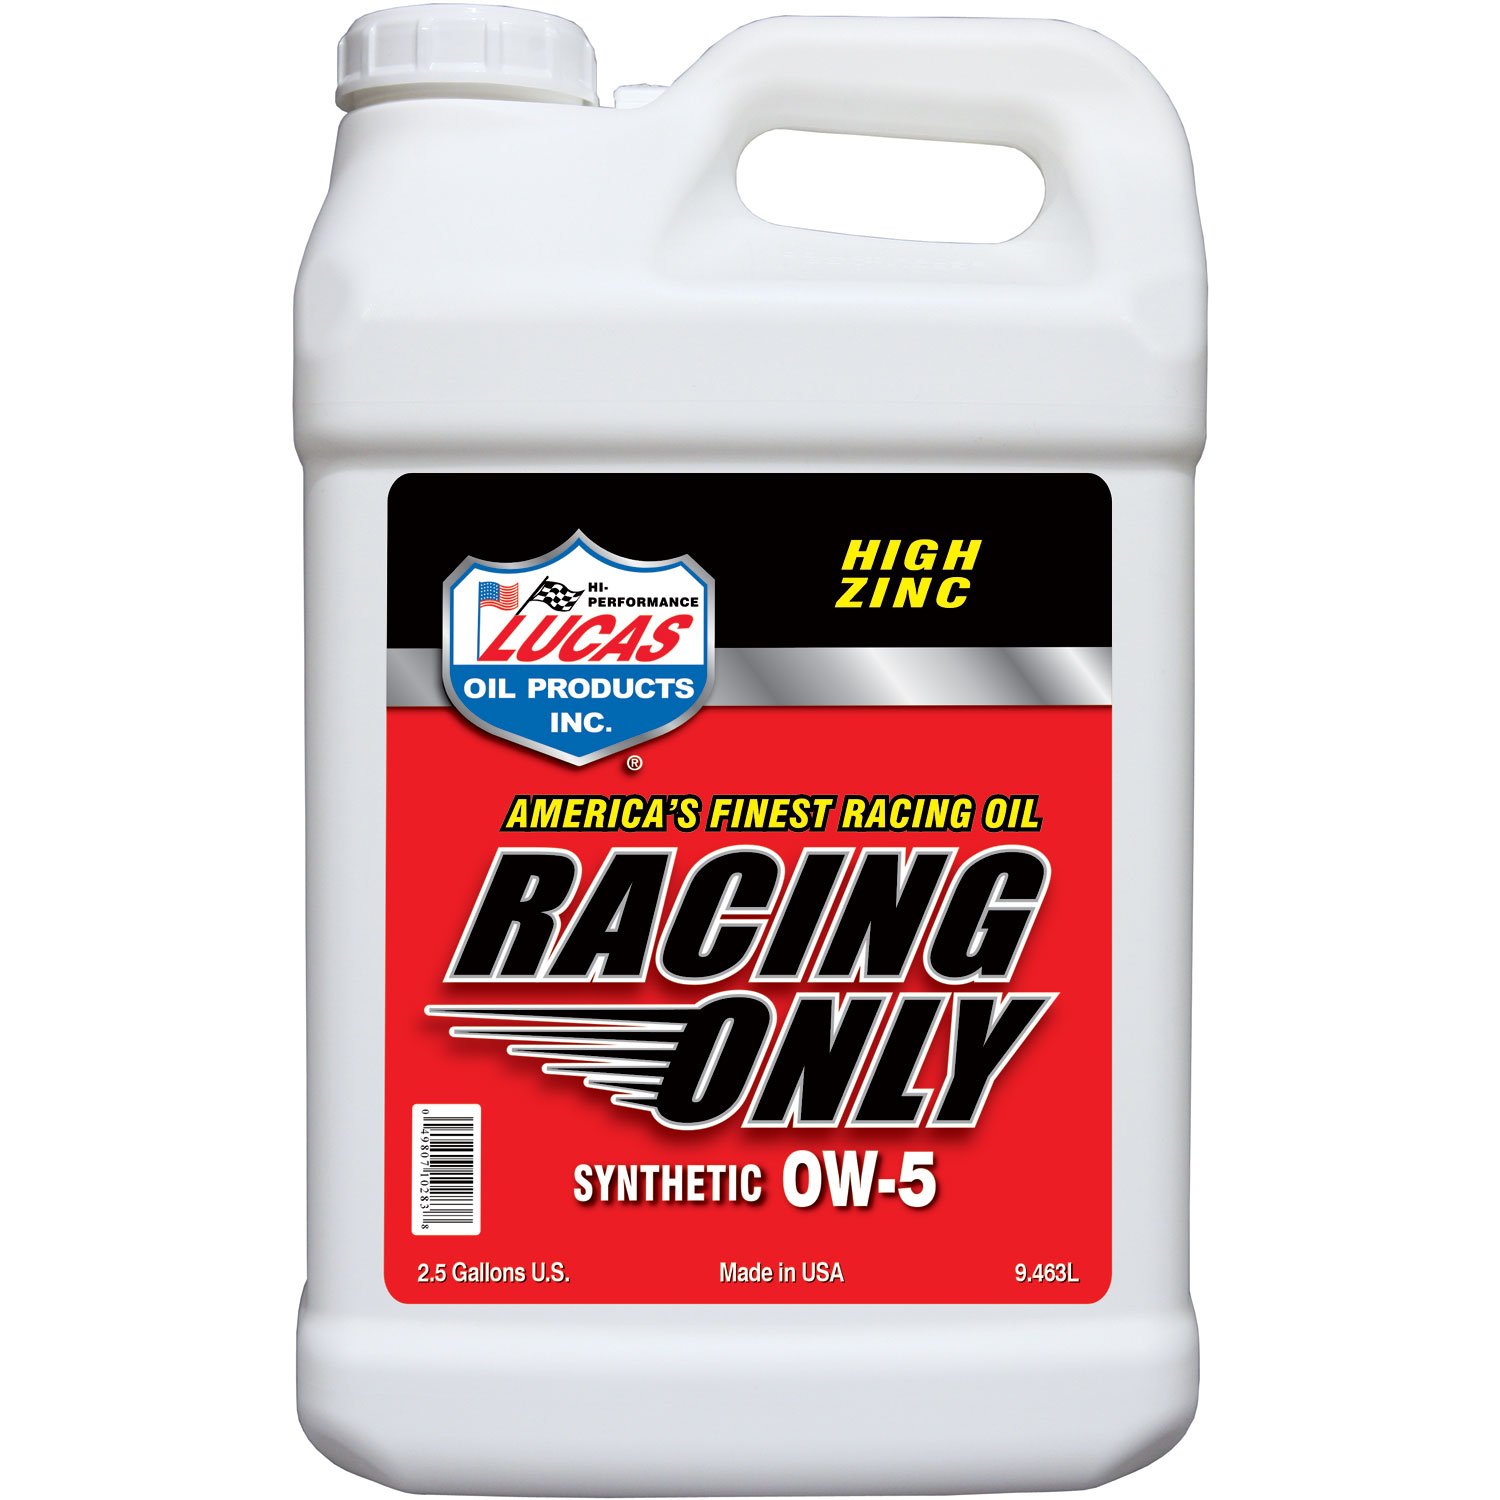 0W-5 Synthetic Racing Only Oil 2.5 Gallon